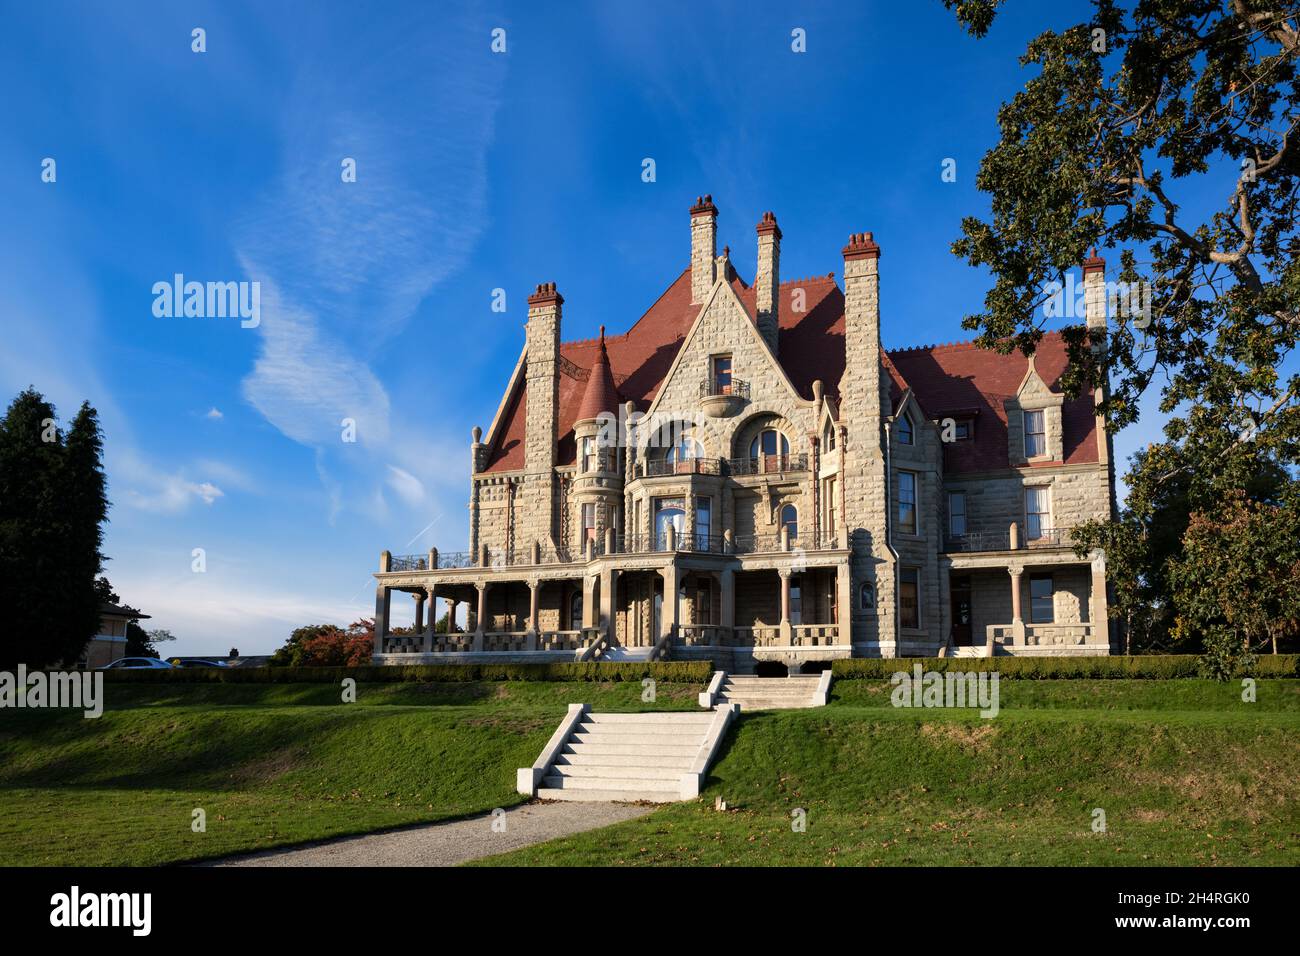 Famous historic Craigdarroch Castle in Victoria against a blue sky on a sunny day Stock Photo